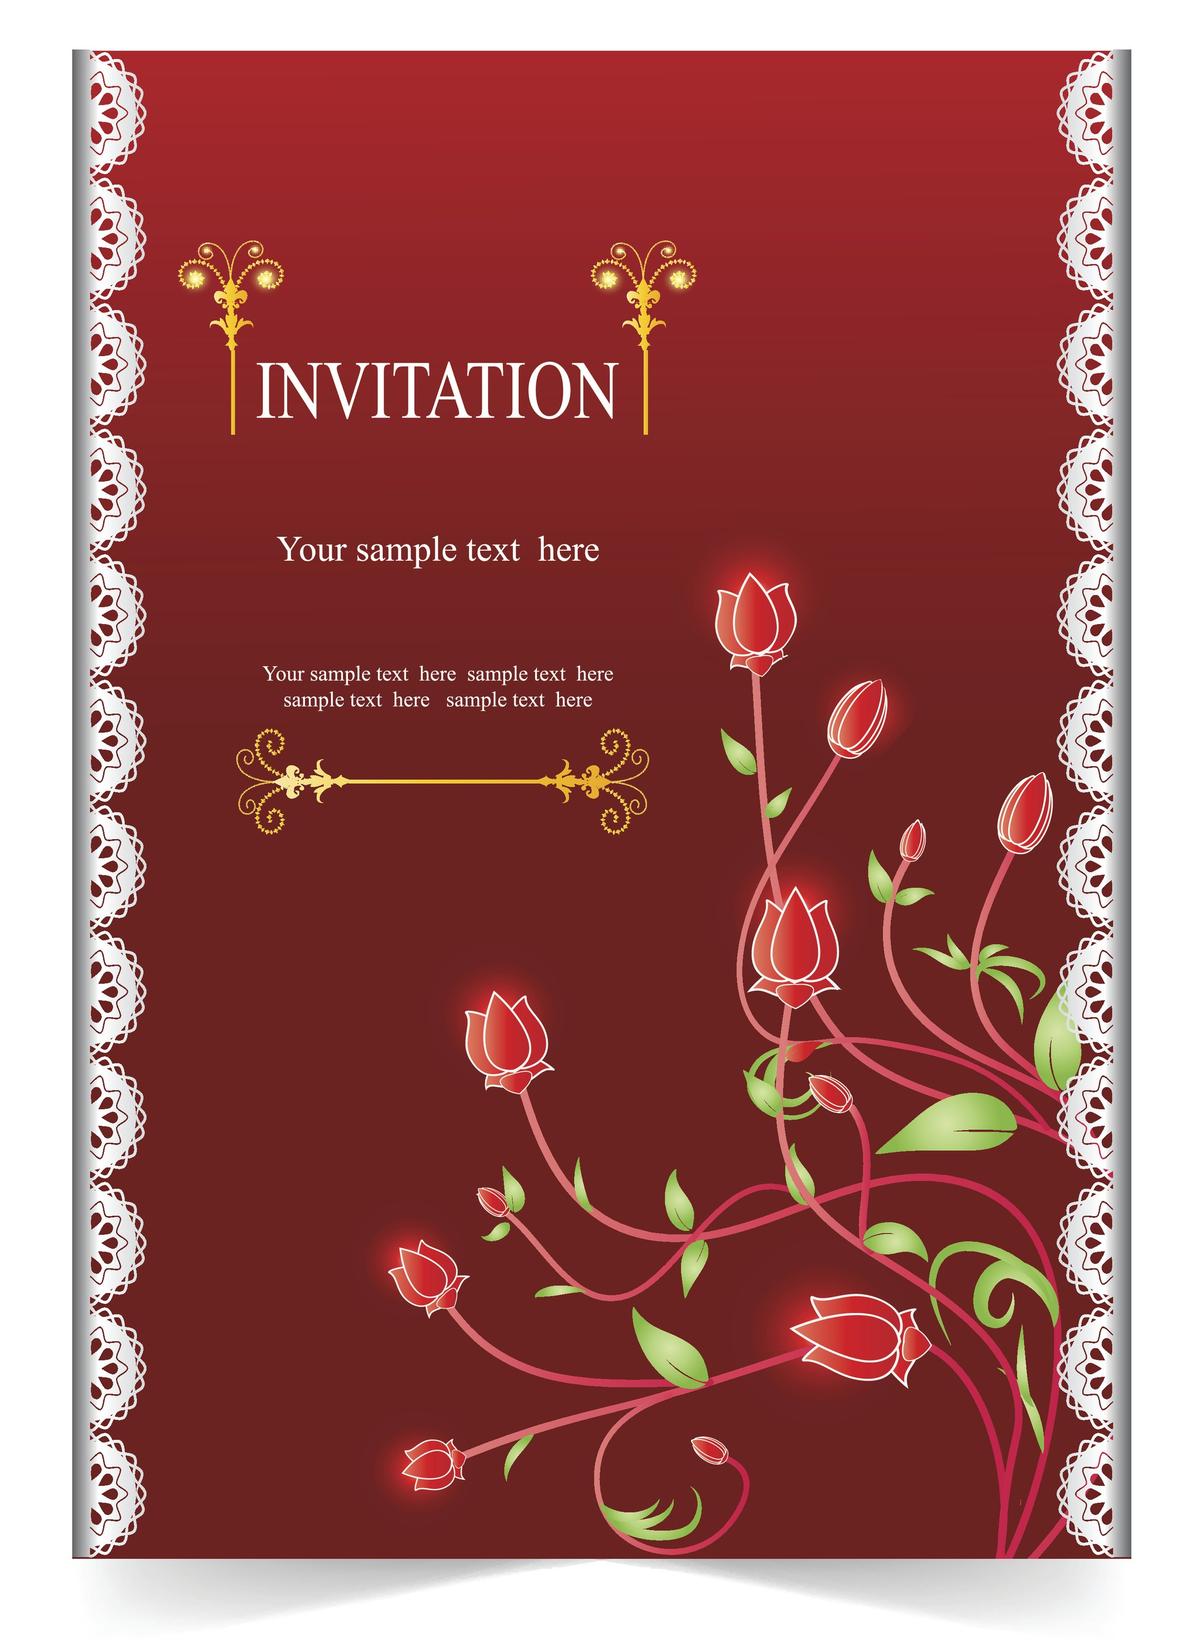 Retirement Party Invitation Wordings To Make The Guest Feel Valued